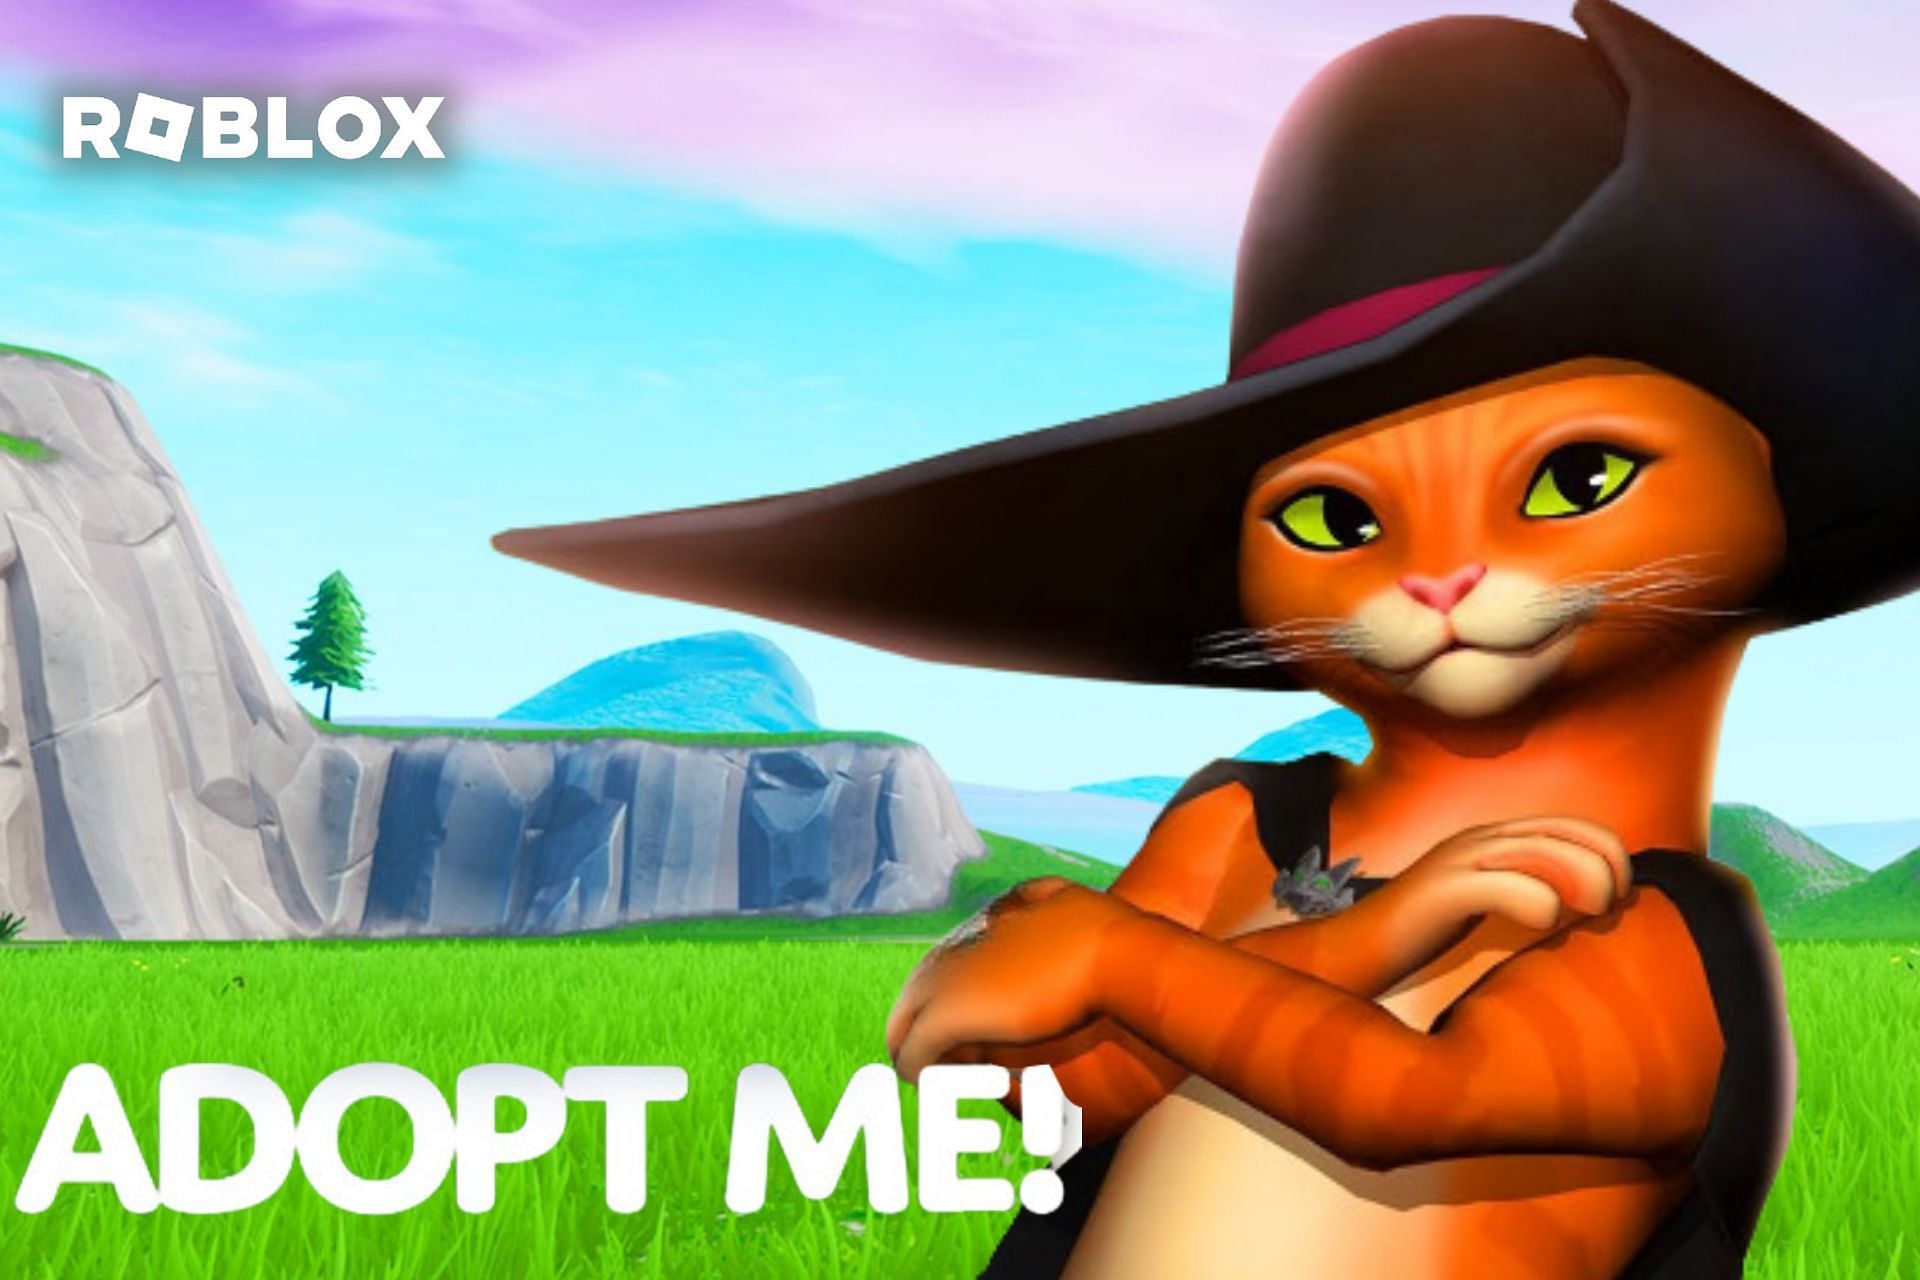 Adopt Me! on X: 😺 Adopt Me x Puss in Boots 😺 👢 Adventure with